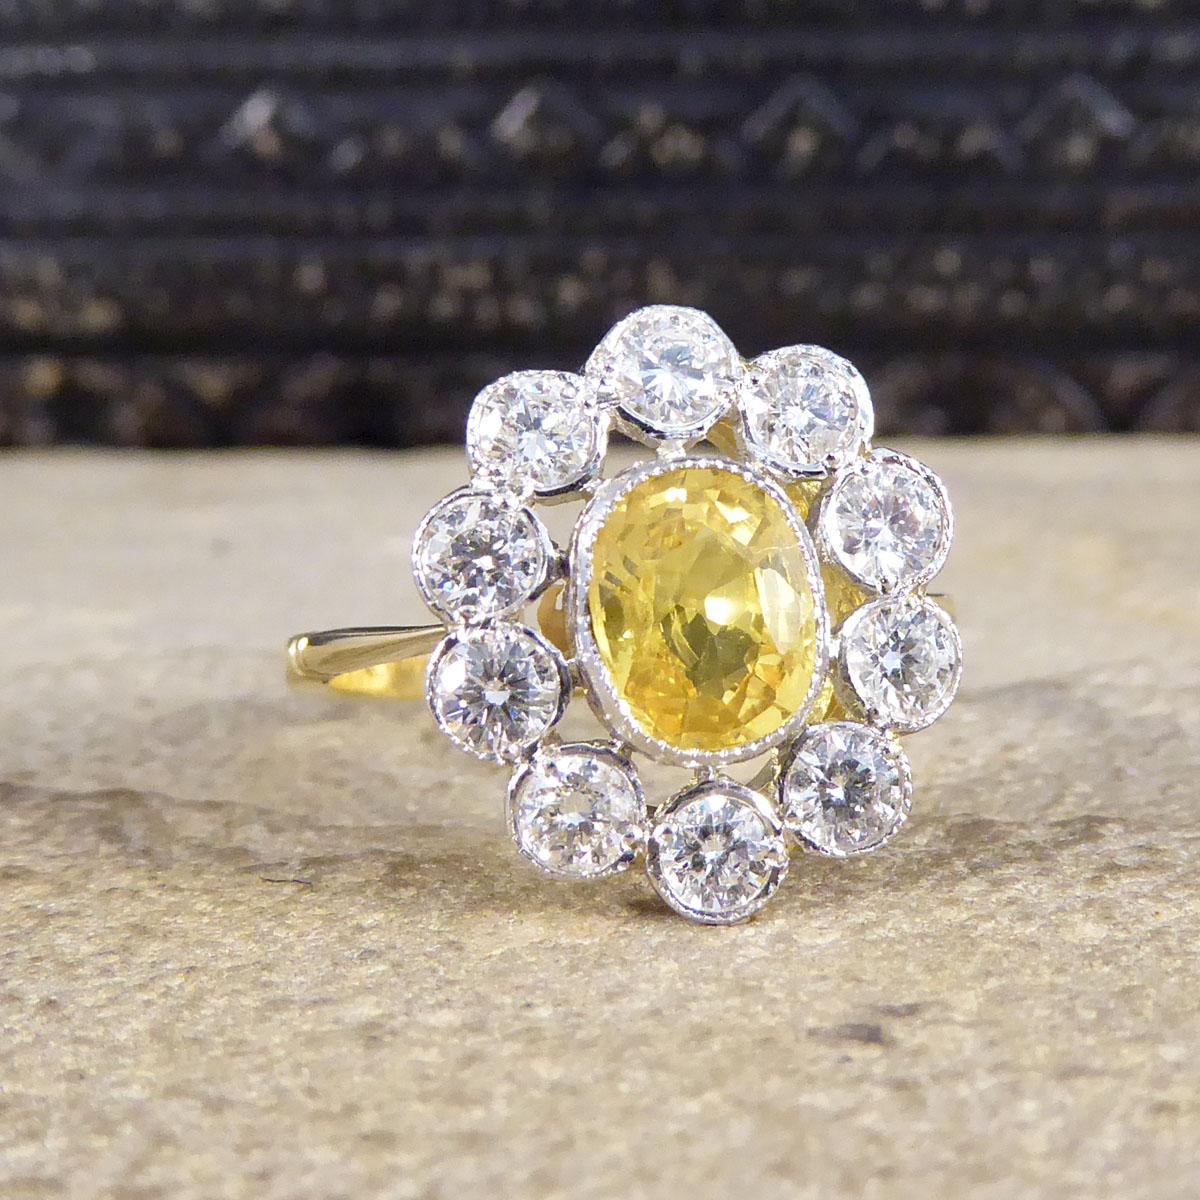 This lovely contemporary Sapphire and Diamond ring has been crafted with a 1.15ct gorgeous and bright Yellow Sapphire centre, surrounded by ten modern brilliant cut Diamonds. Using larger Diamonds in this cluster ring allows there to be spacing